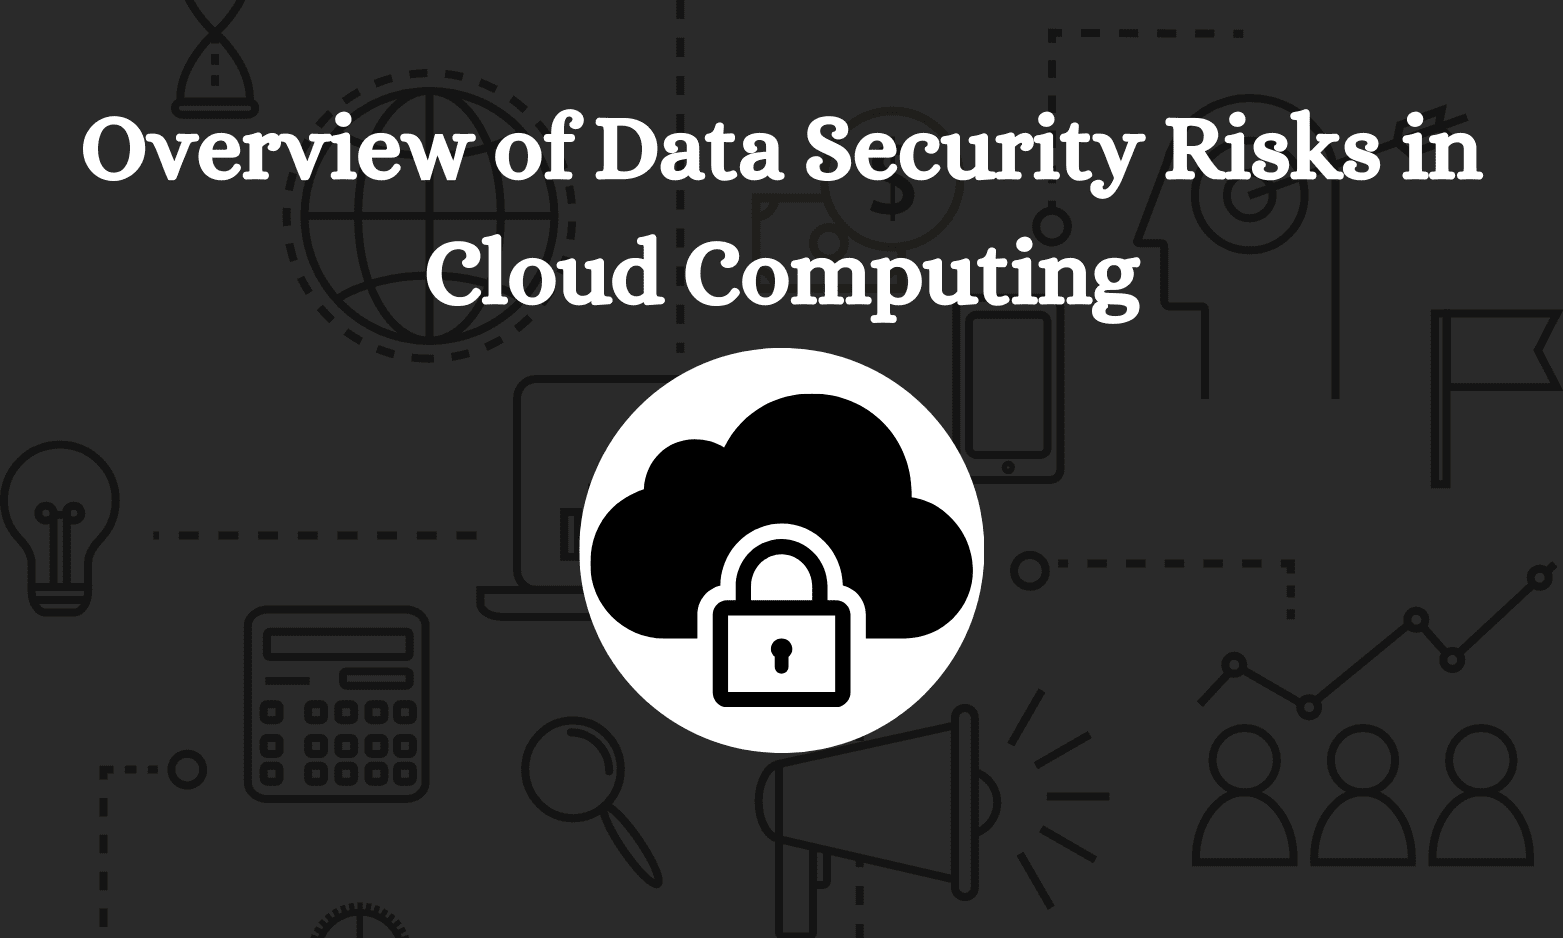 Overview of Data Security Risks in Cloud Computing